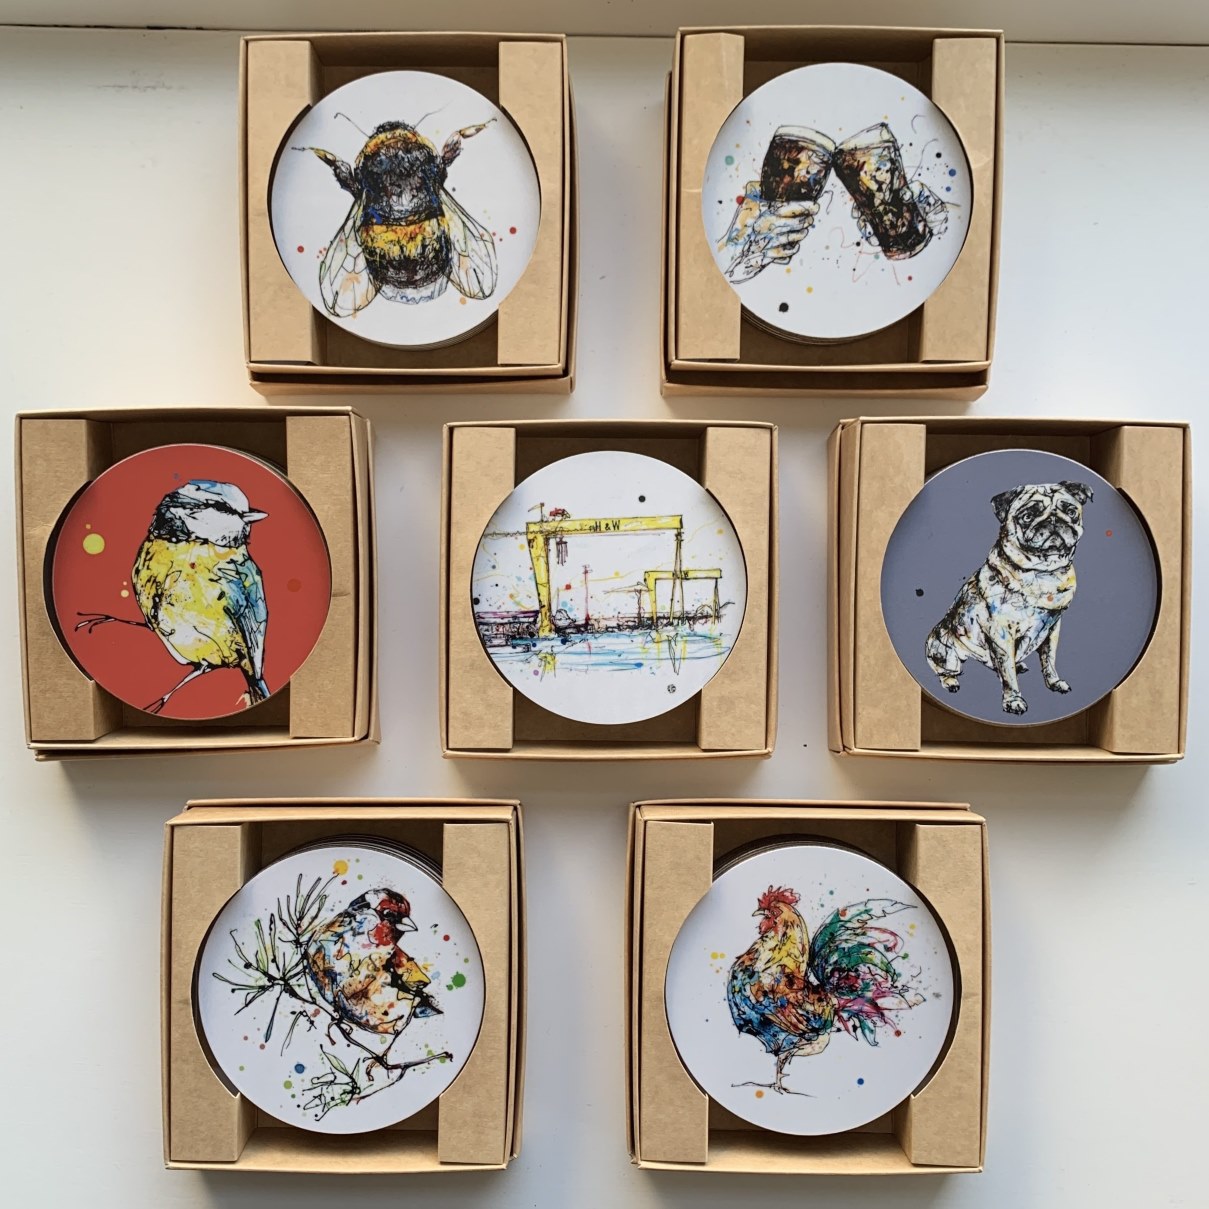 How To Display Coasters On A Wall